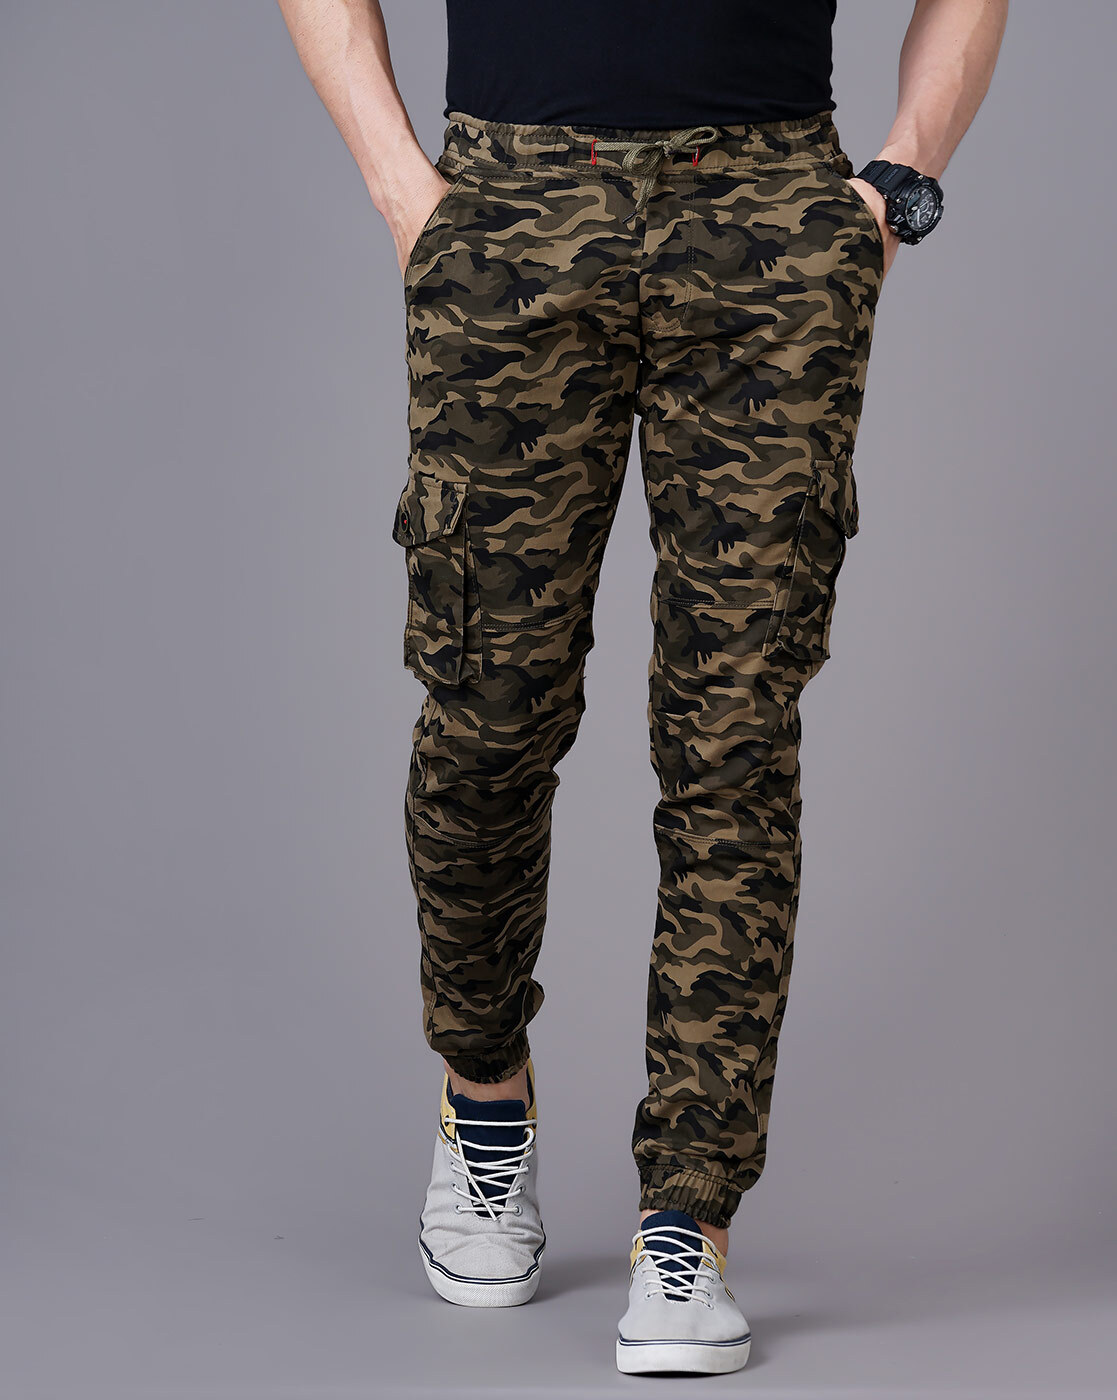 Chidakash WomensGirls Relaxed Military Print Camouflage Track Pant JoggerTrouser for Gym Sport  Army Pant  Amazonin Fashion